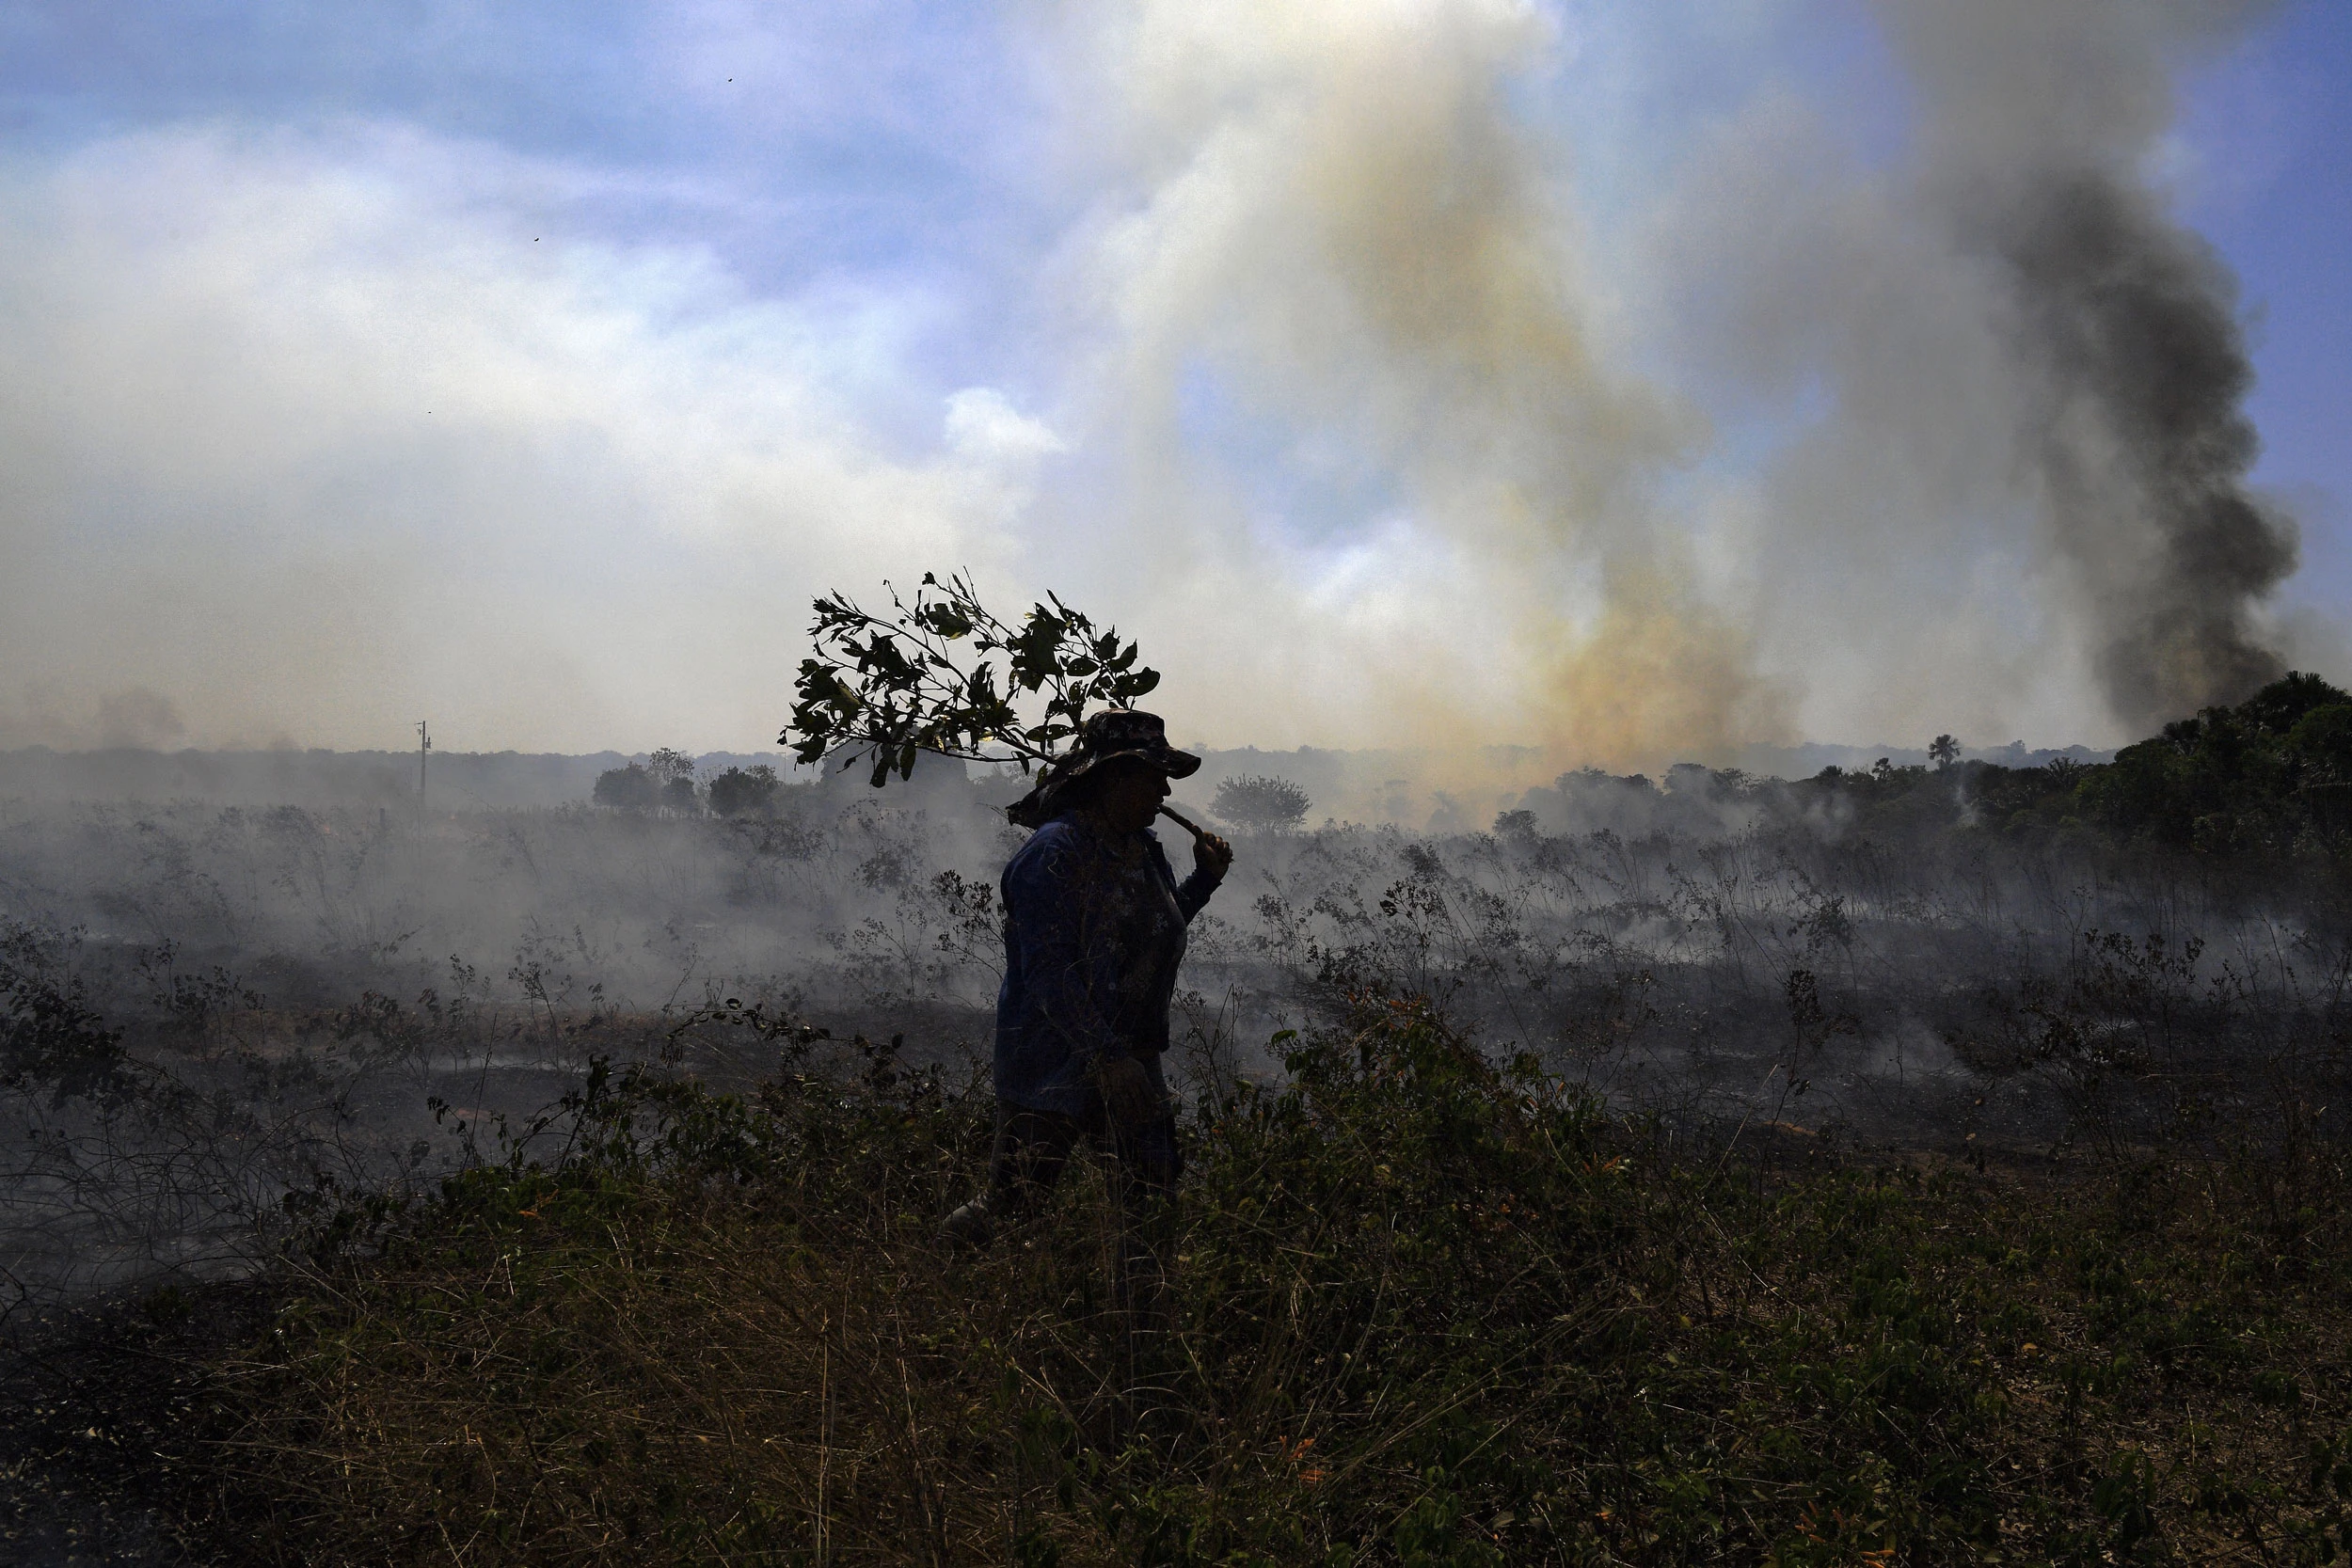 TOPSHOT - A farm worker tries to put out an illegal fire which burned part of the Amazon rainforest reserve and was spreading to their land north of Sinop, in Mato Grosso State, Brazil, on August 10, 2020. (Photo by Carl DE SOUZA / AFP) (Photo by CARL DE SOUZA/AFP via Getty Images)